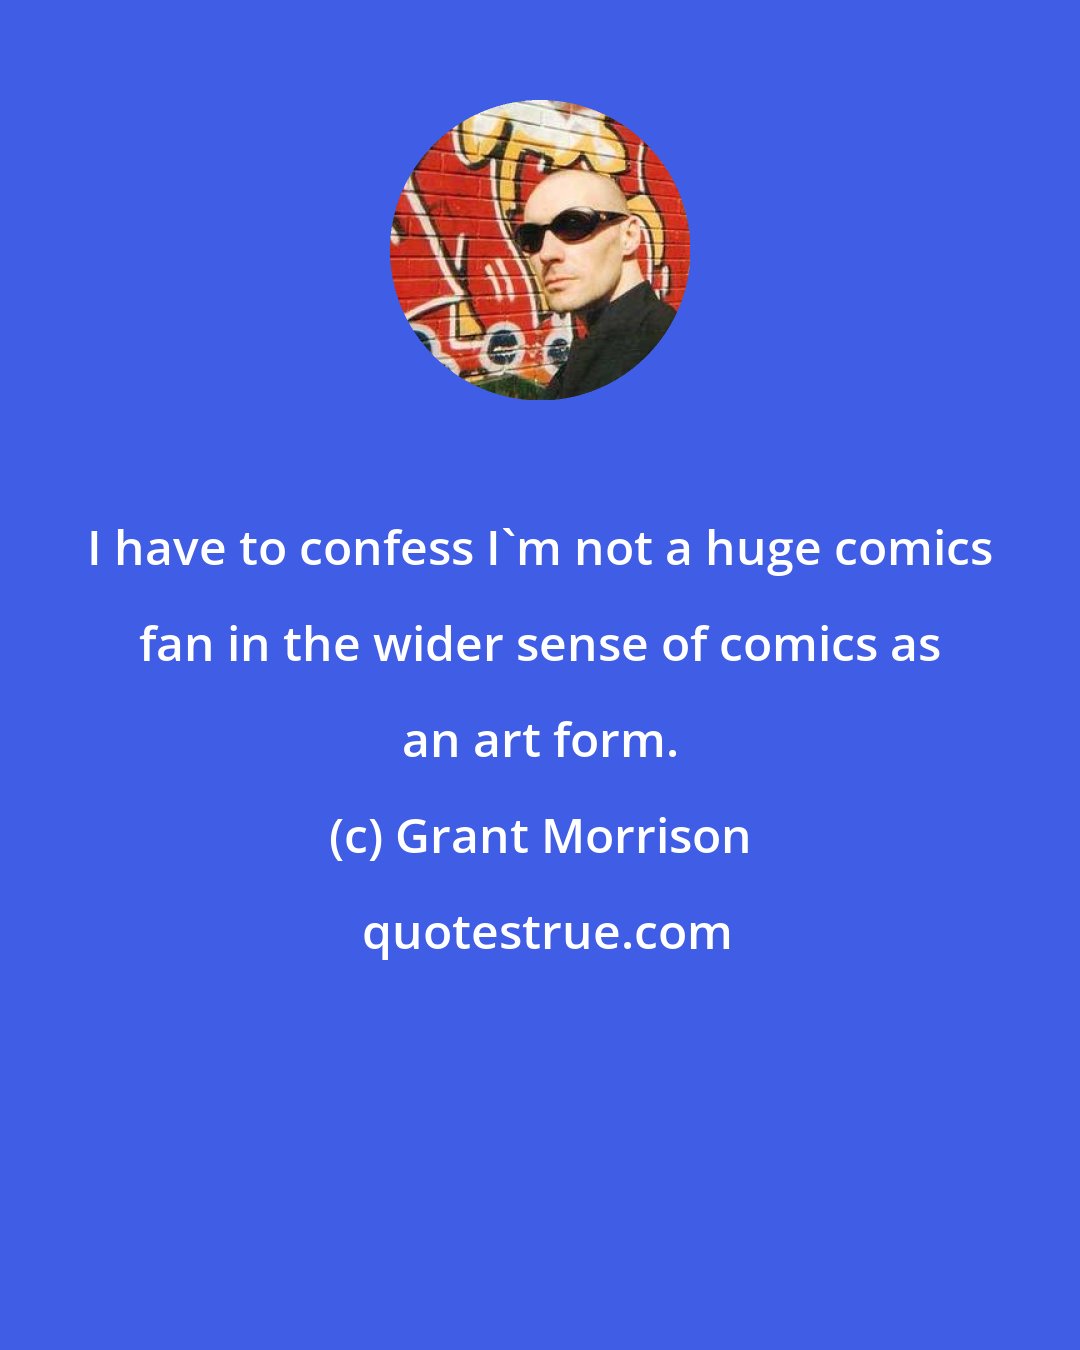 Grant Morrison: I have to confess I'm not a huge comics fan in the wider sense of comics as an art form.